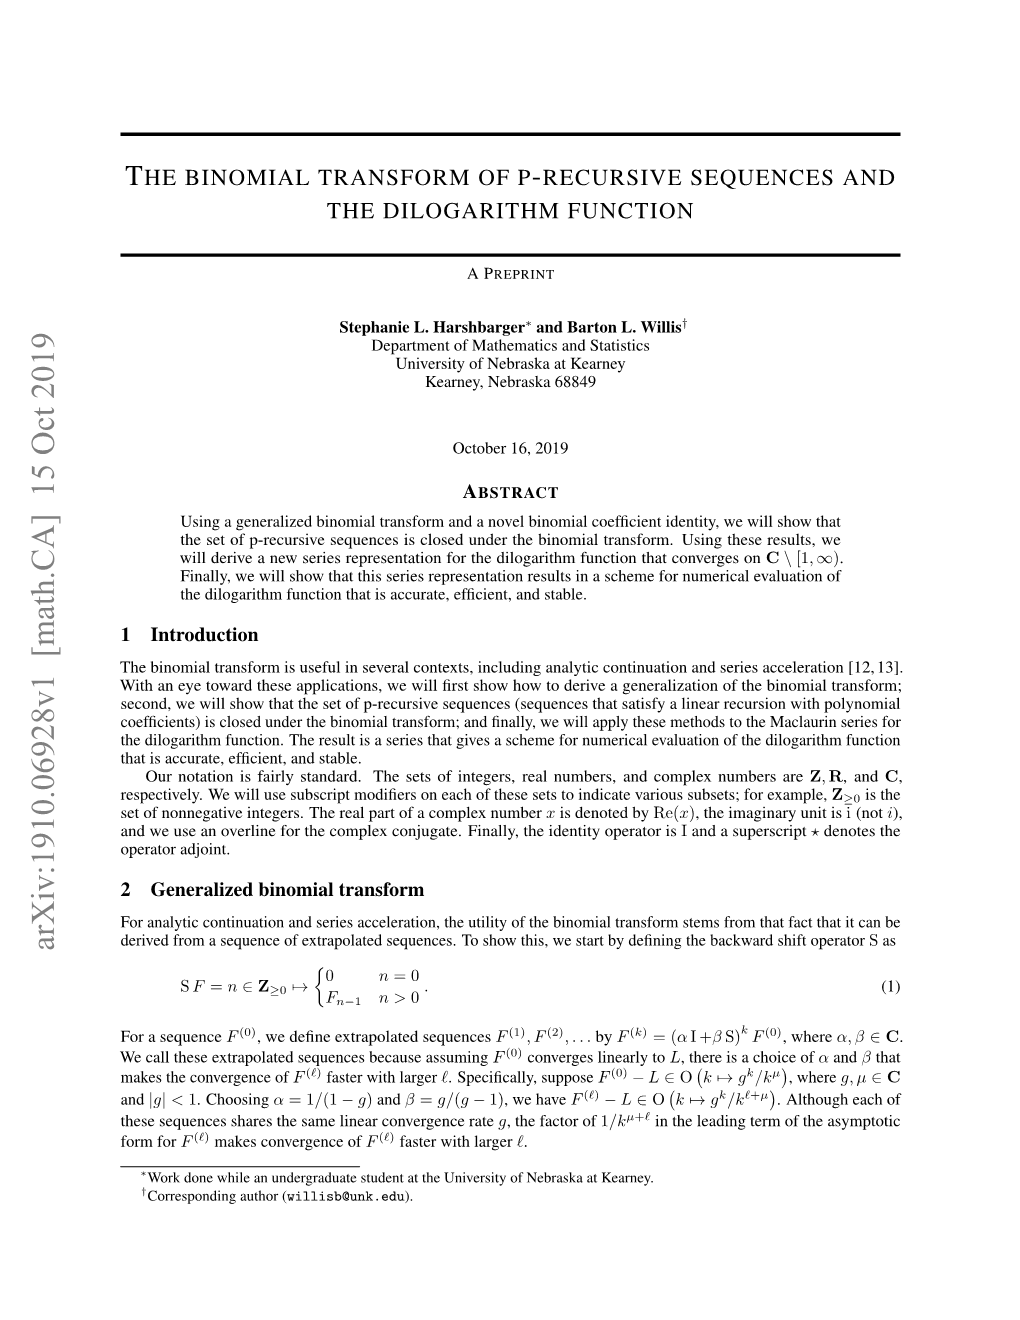 The Binomial Transform of P-Recursive Sequences and the Dilogarithm Function